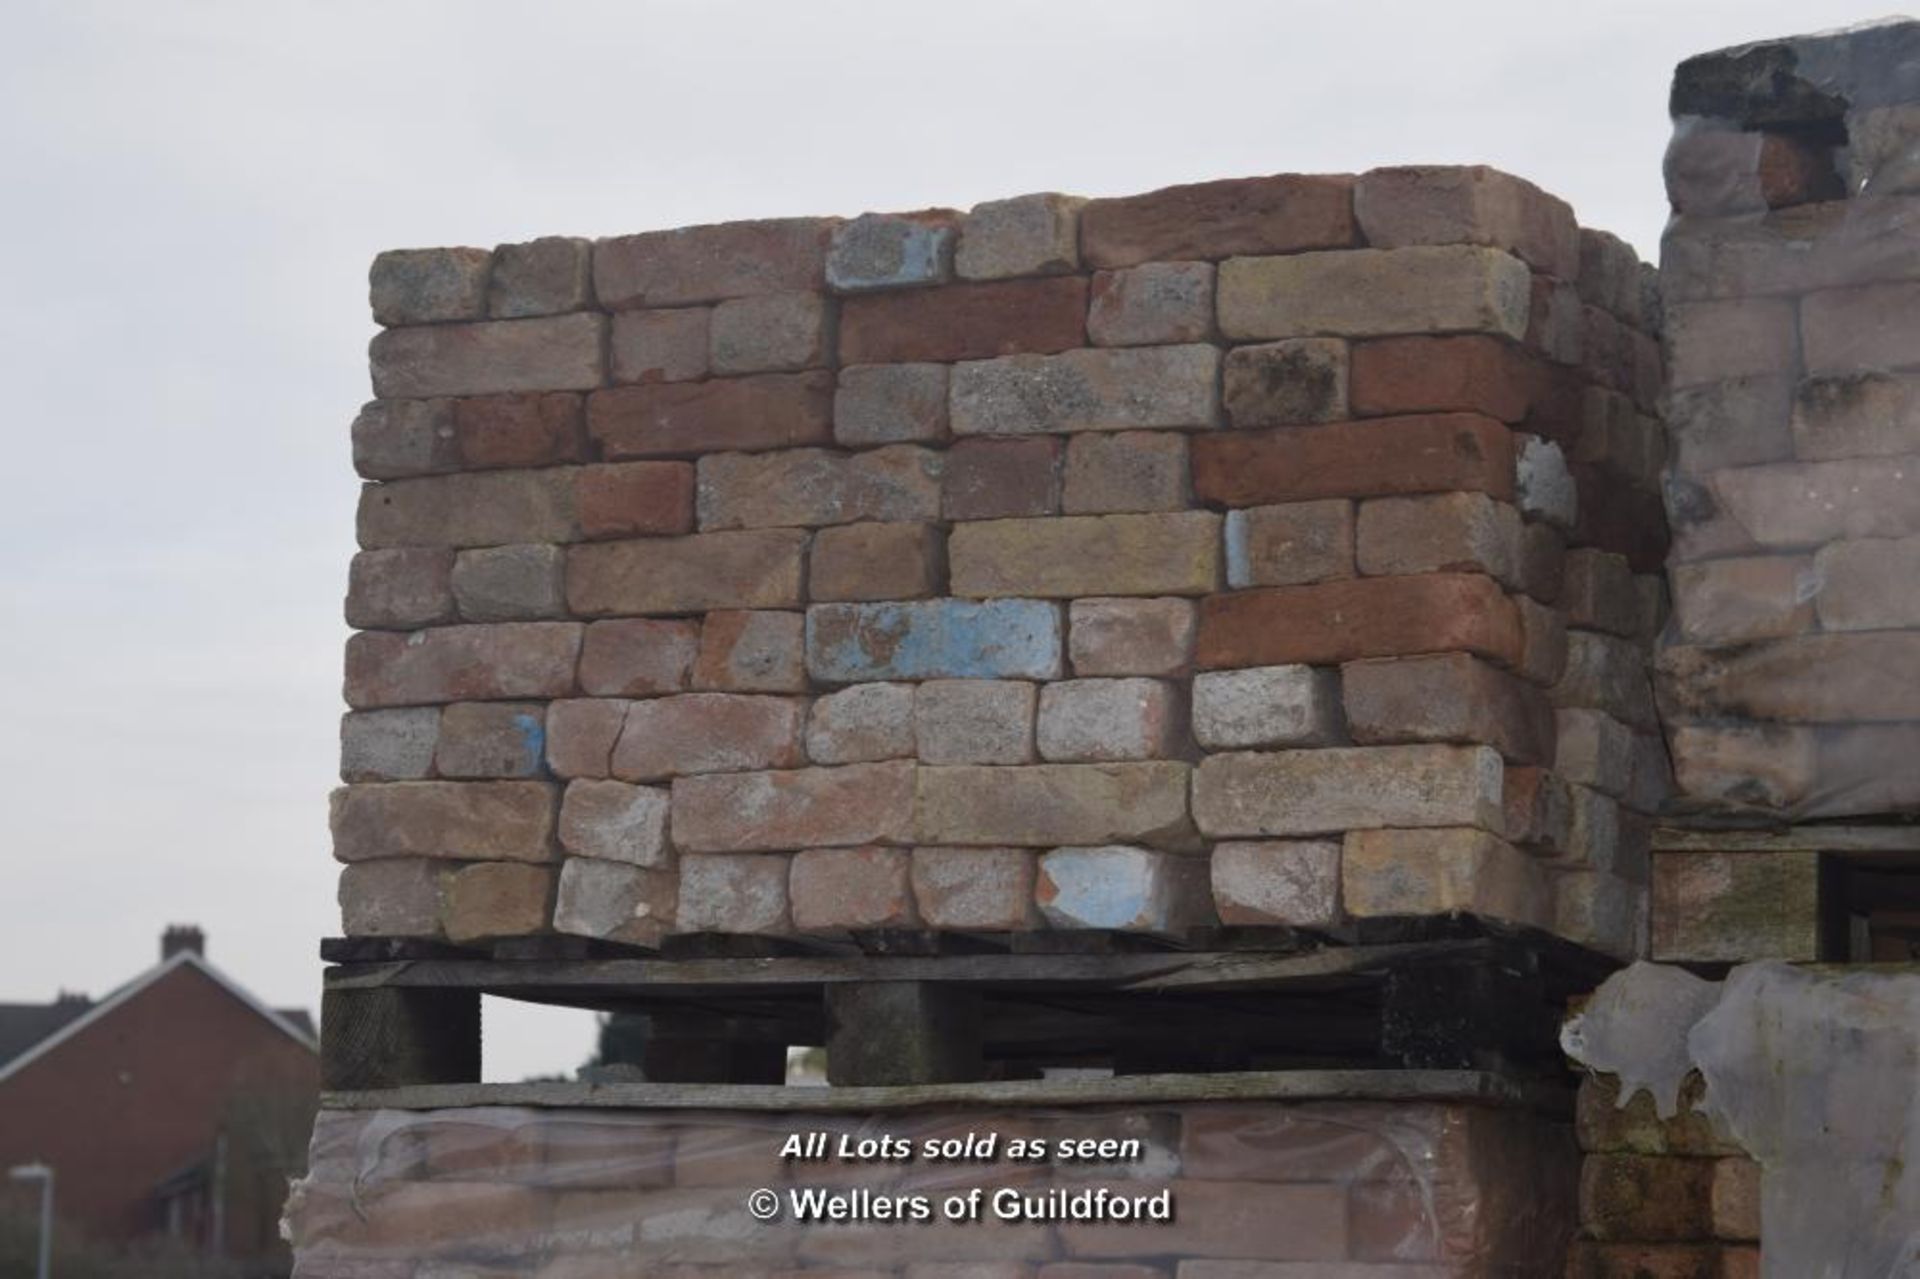 *PALLET OF APPROX FOUR HUNDRED AND TWENTY RED HAND MADE BRICKS APPROX SIZE 215MM X 60/65MM